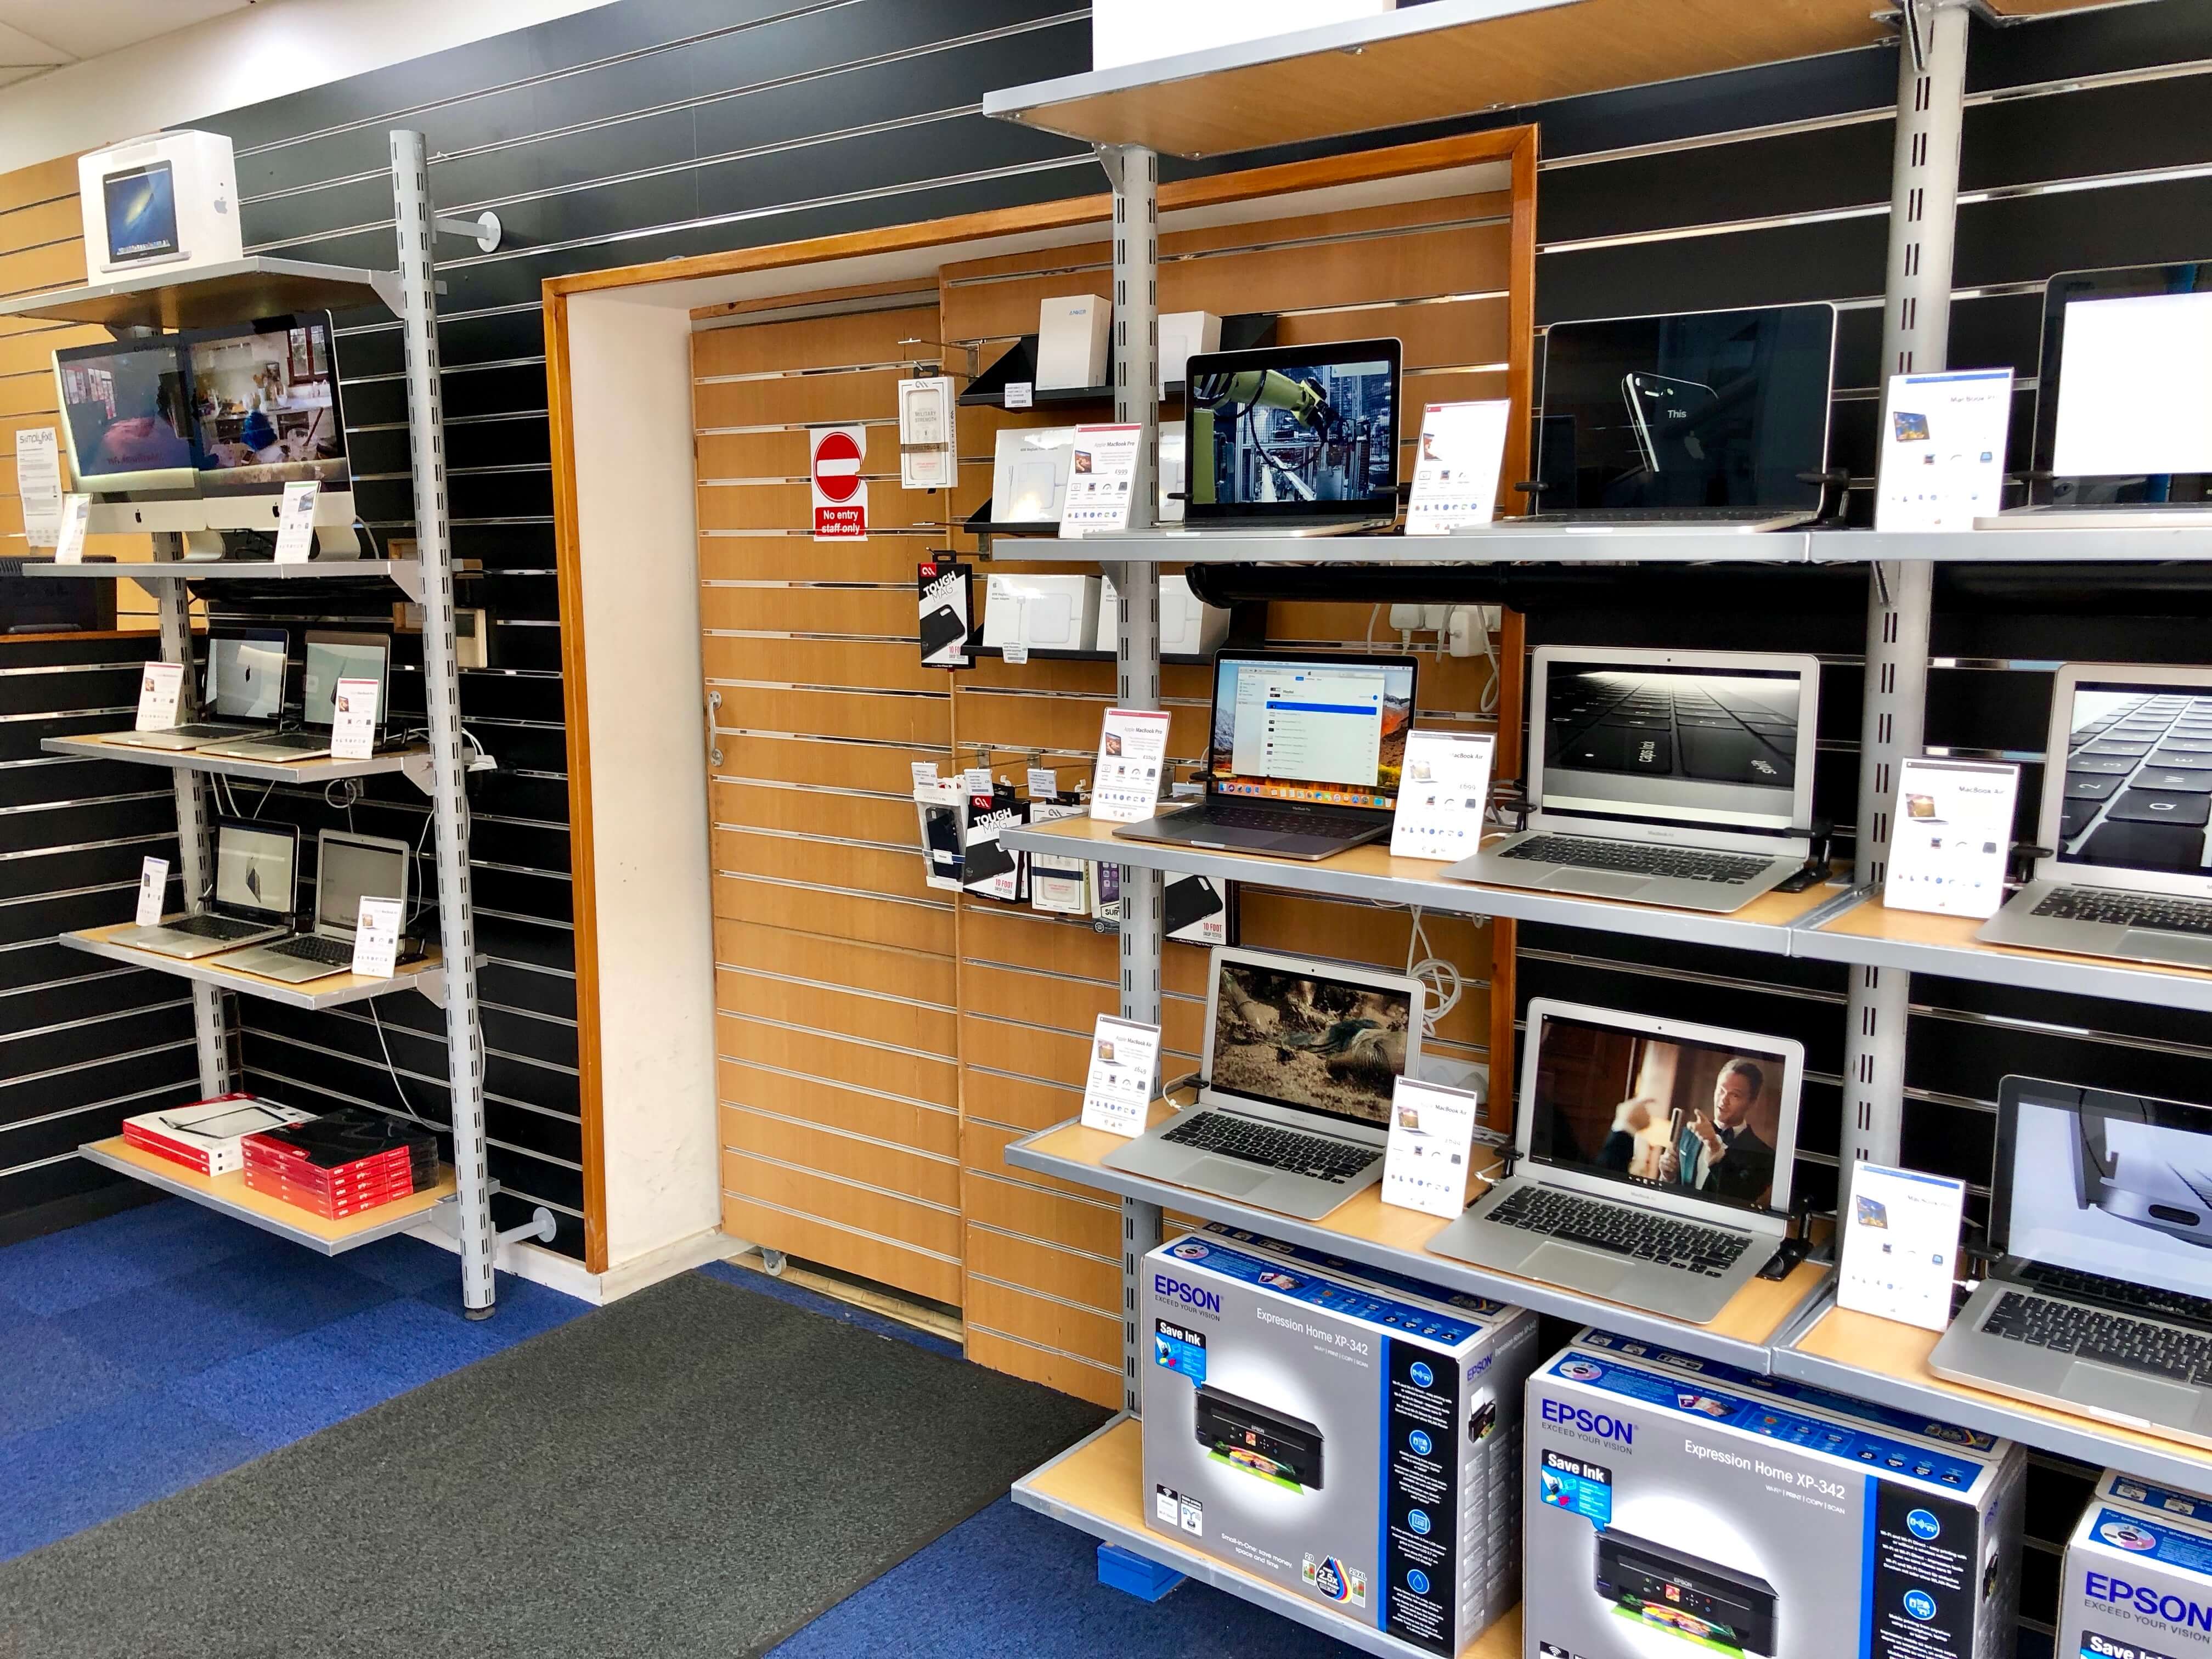 Shelves in SimplyFixIt at Forrest Road, which have certified refurbished Macs on them.